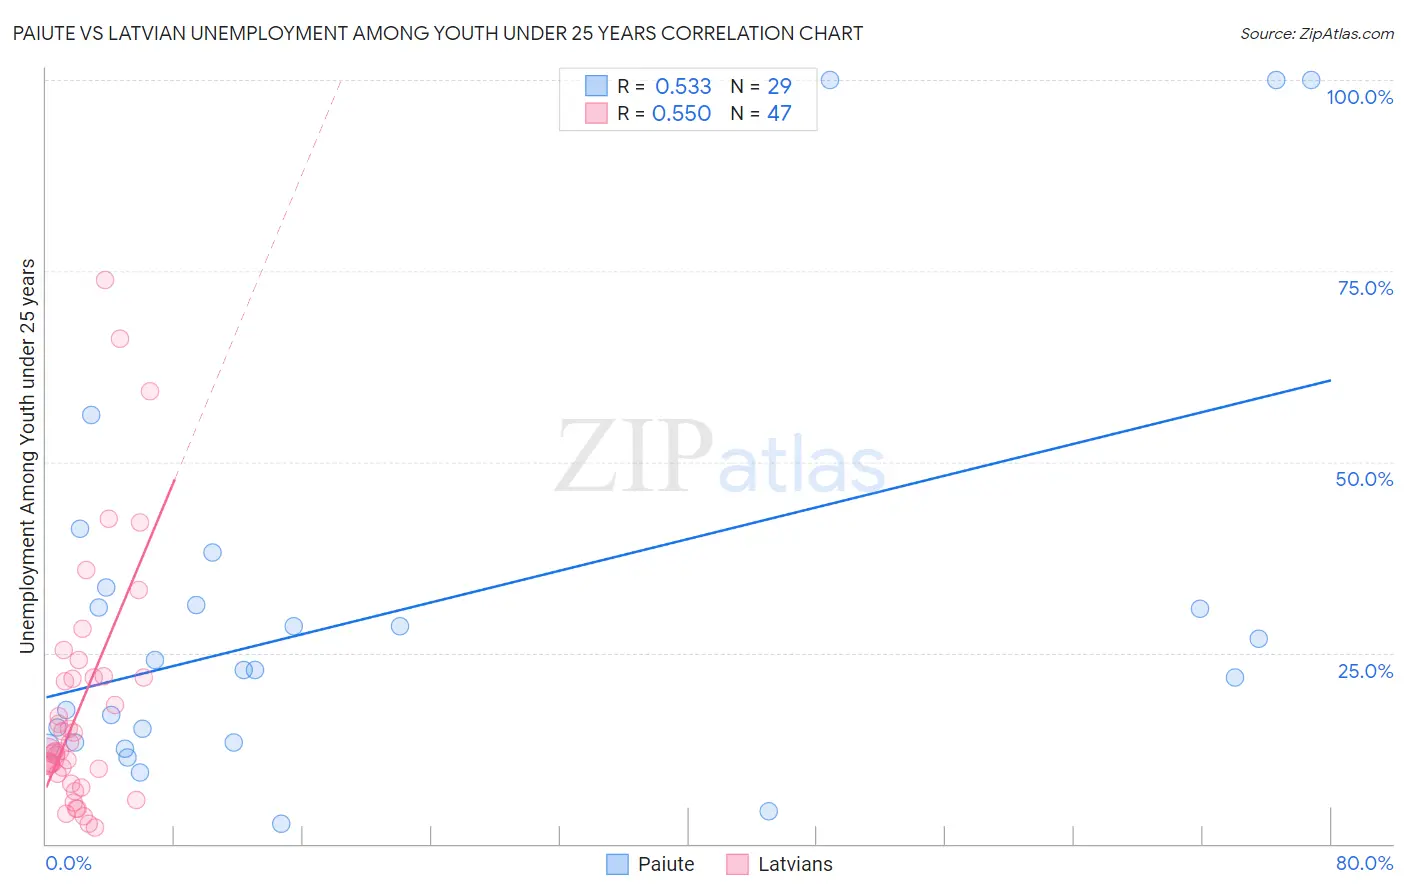 Paiute vs Latvian Unemployment Among Youth under 25 years